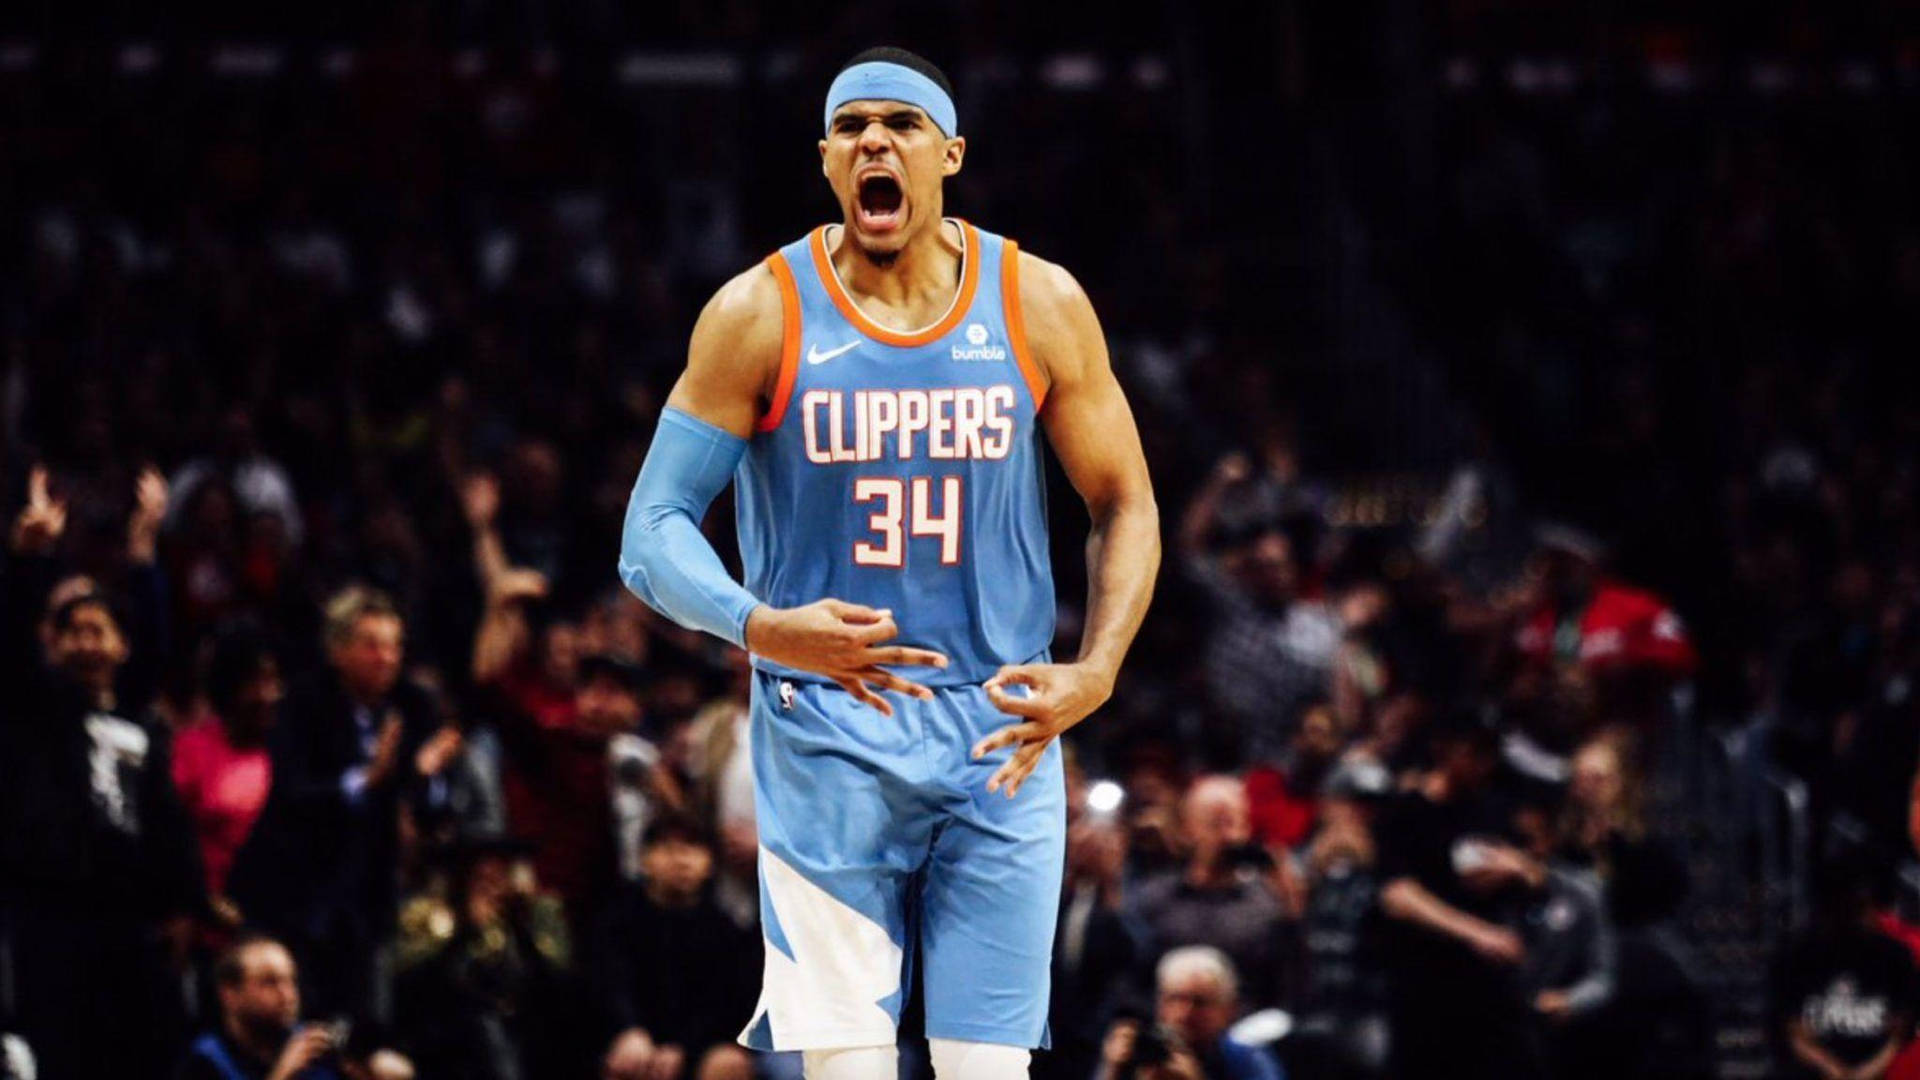 Nba Player Tobias Harris Los Angeles Clippers Shouting Background